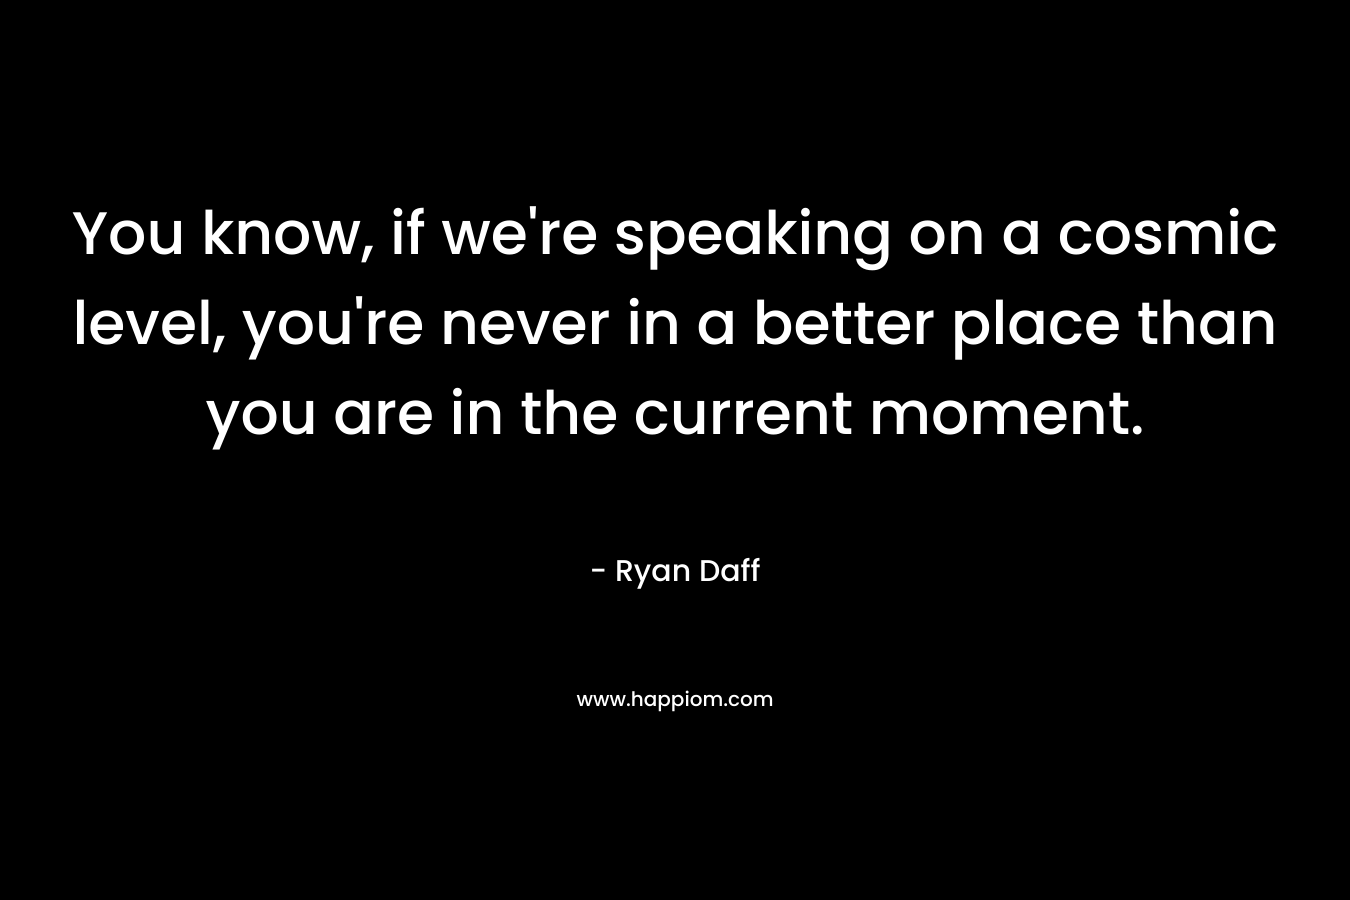 You know, if we're speaking on a cosmic level, you're never in a better place than you are in the current moment.